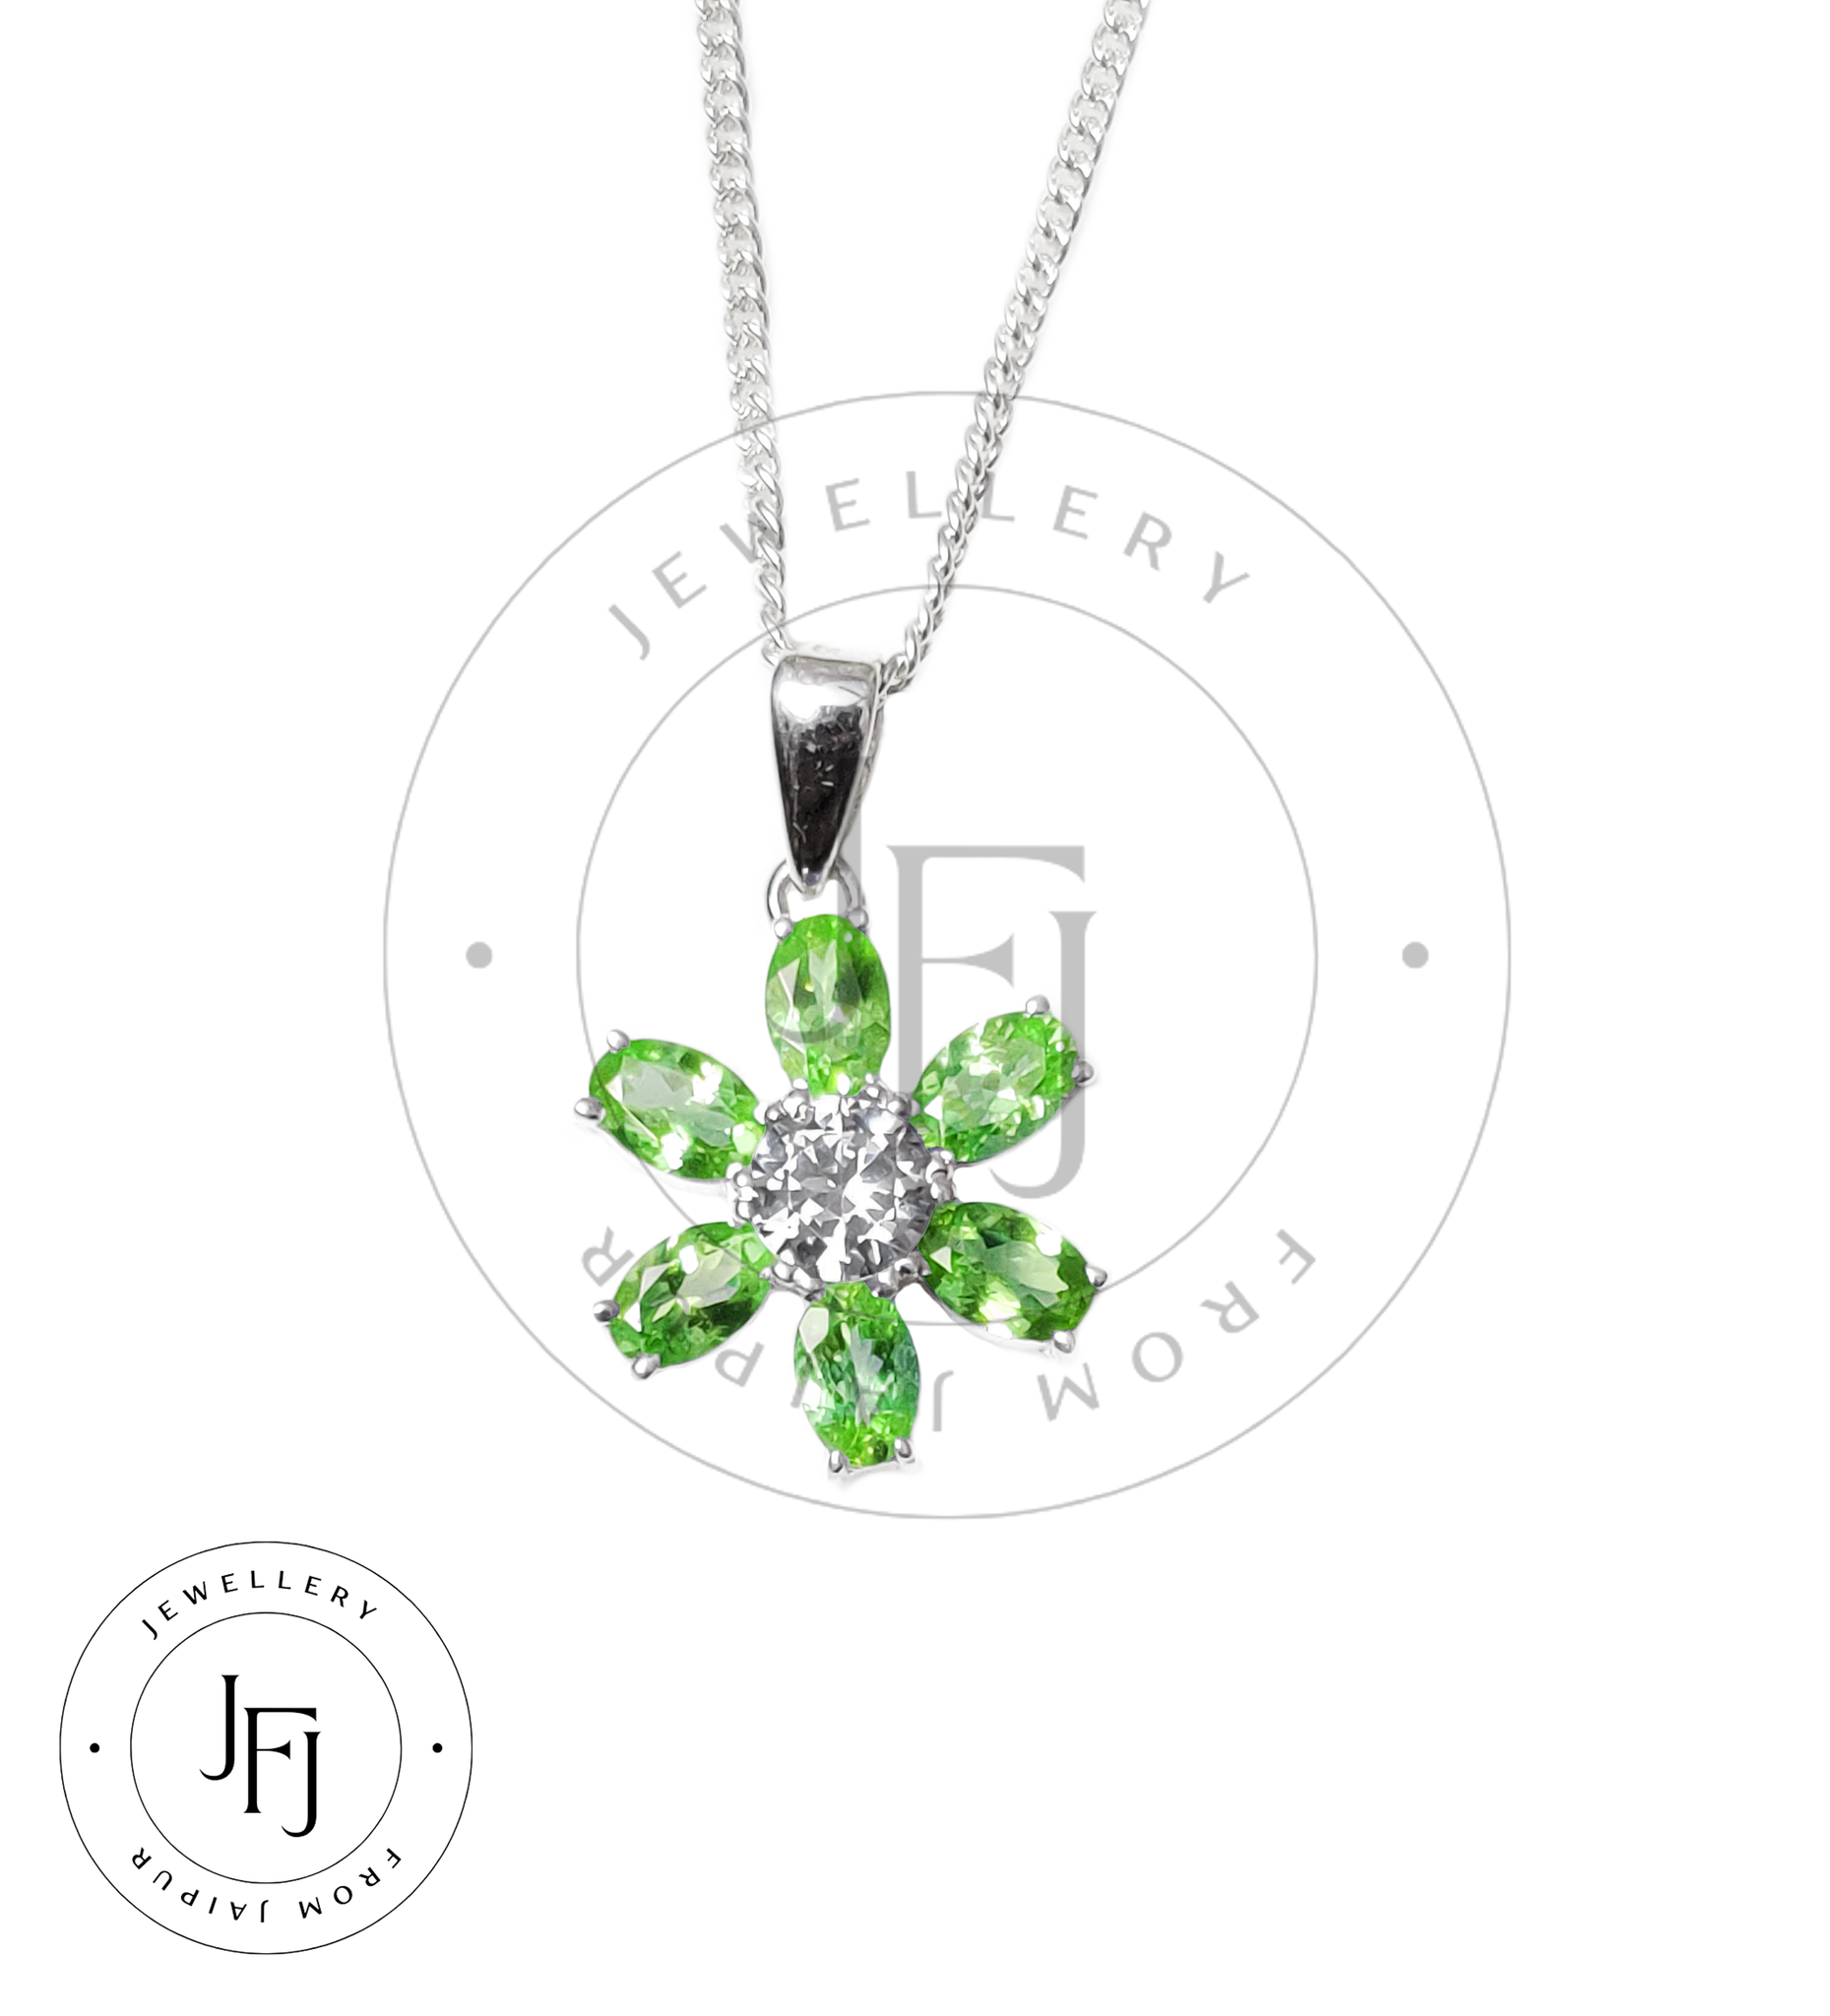 Peridot Necklace Natural Peridot Pendant Necklace Peridot Flower Pendant Peridot Jewelry Dainty Necklace August Birthstone Silver Pendant